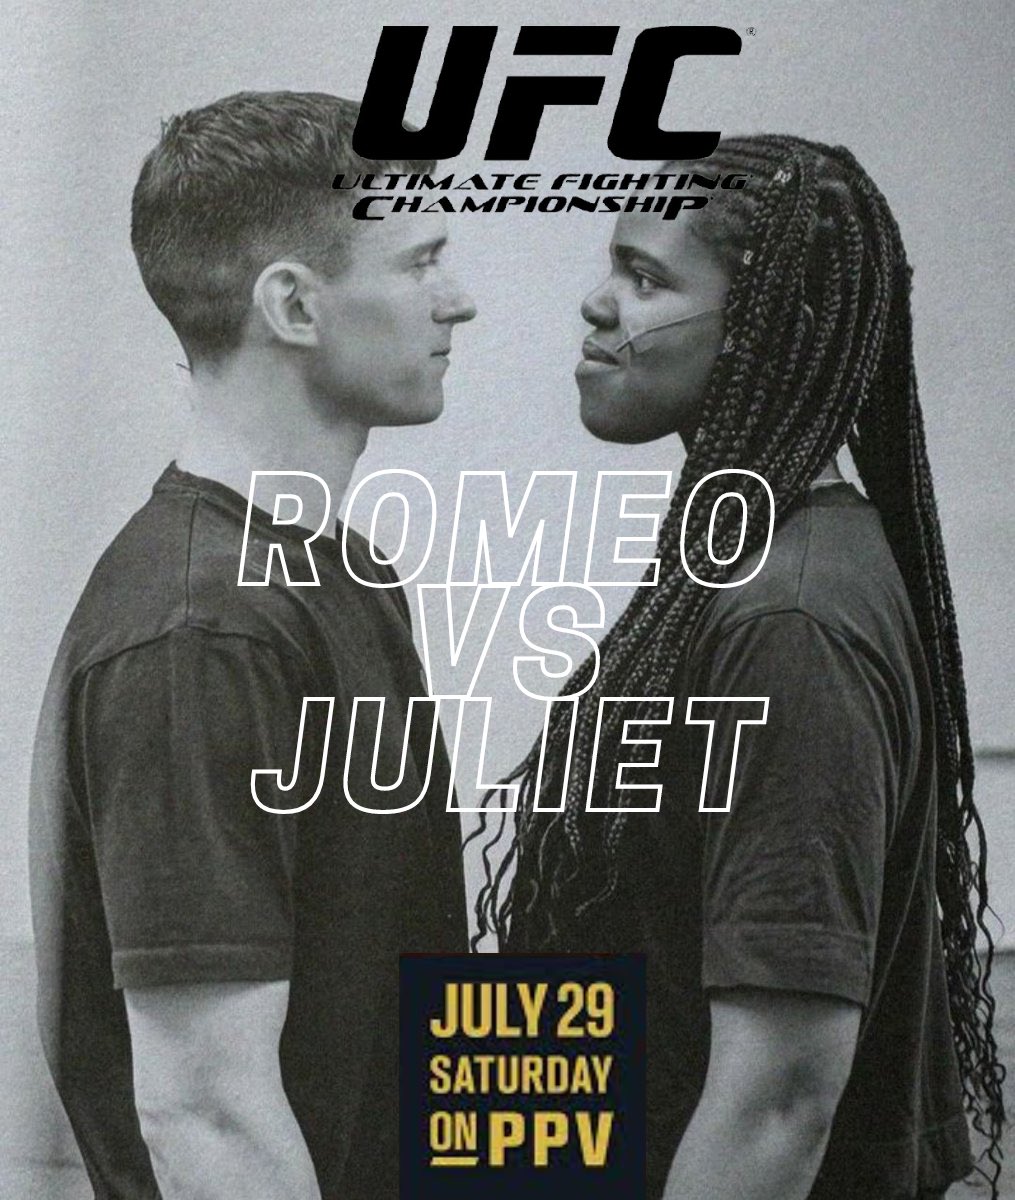 Don’t miss #RomeoJuliet available on PPV #UFCFightNight